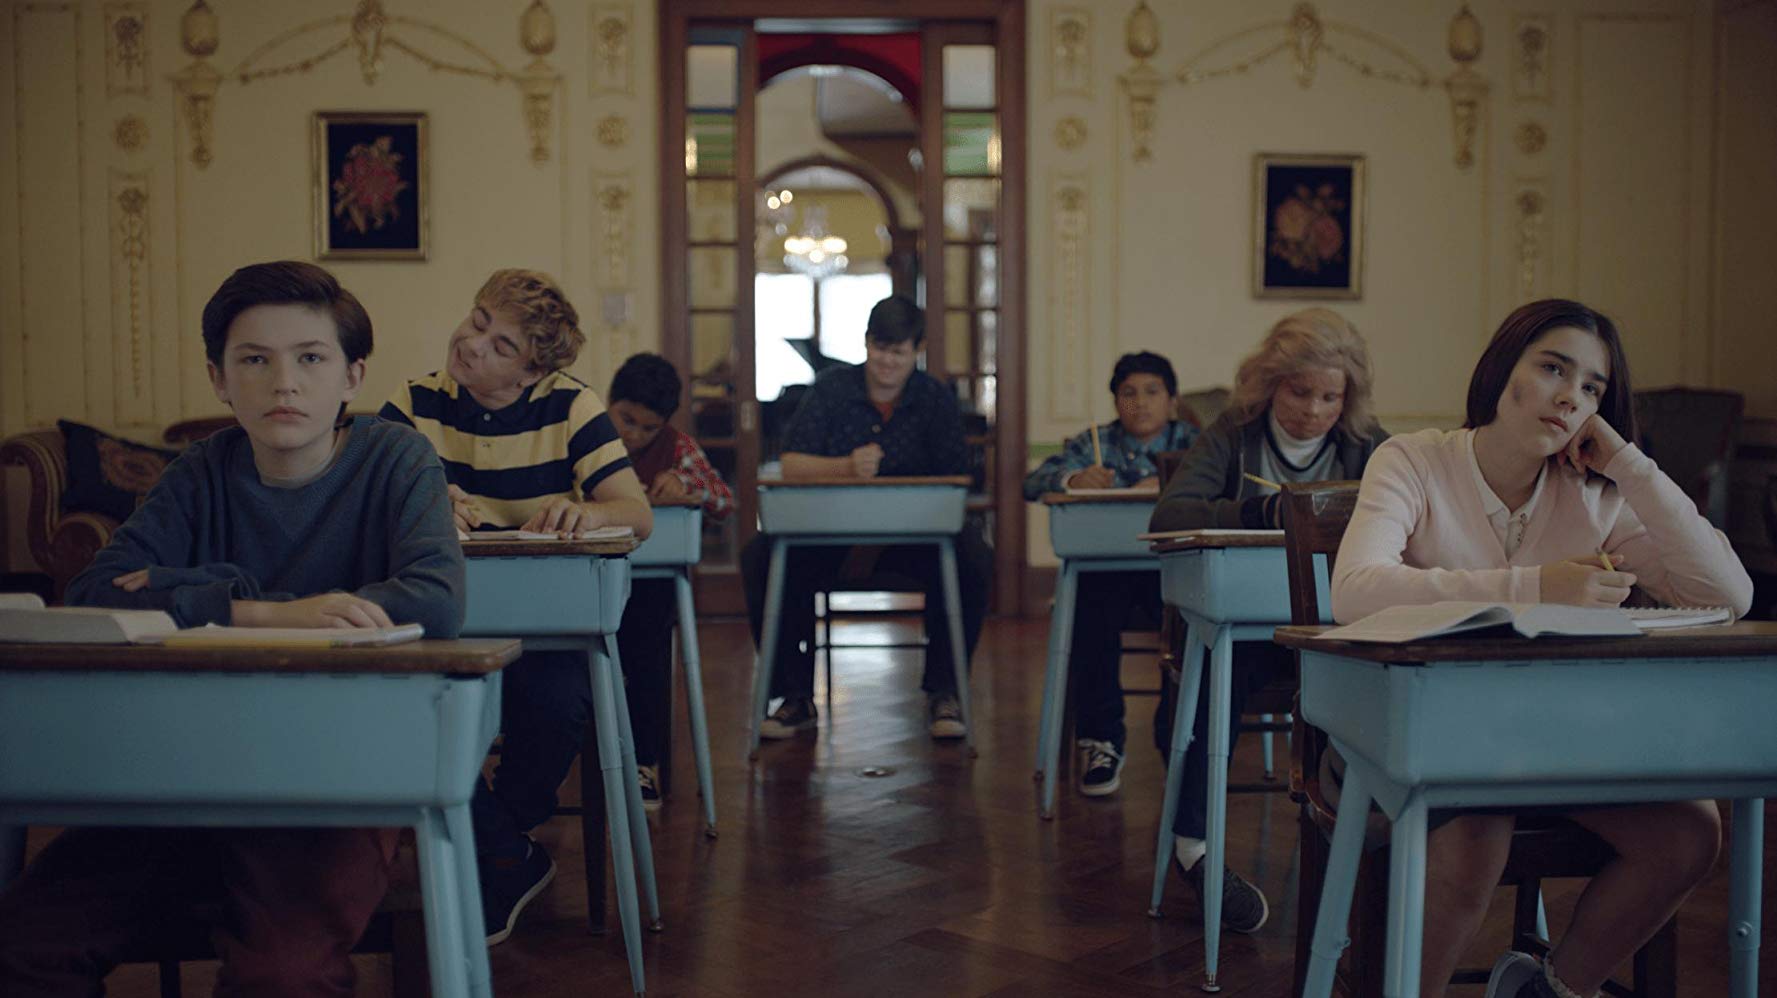 Seven children, most with with pale skin and dark hair, sit at light blue schooldesks arranged in a triangle. The two children in front, a boy and a girl, look bored.